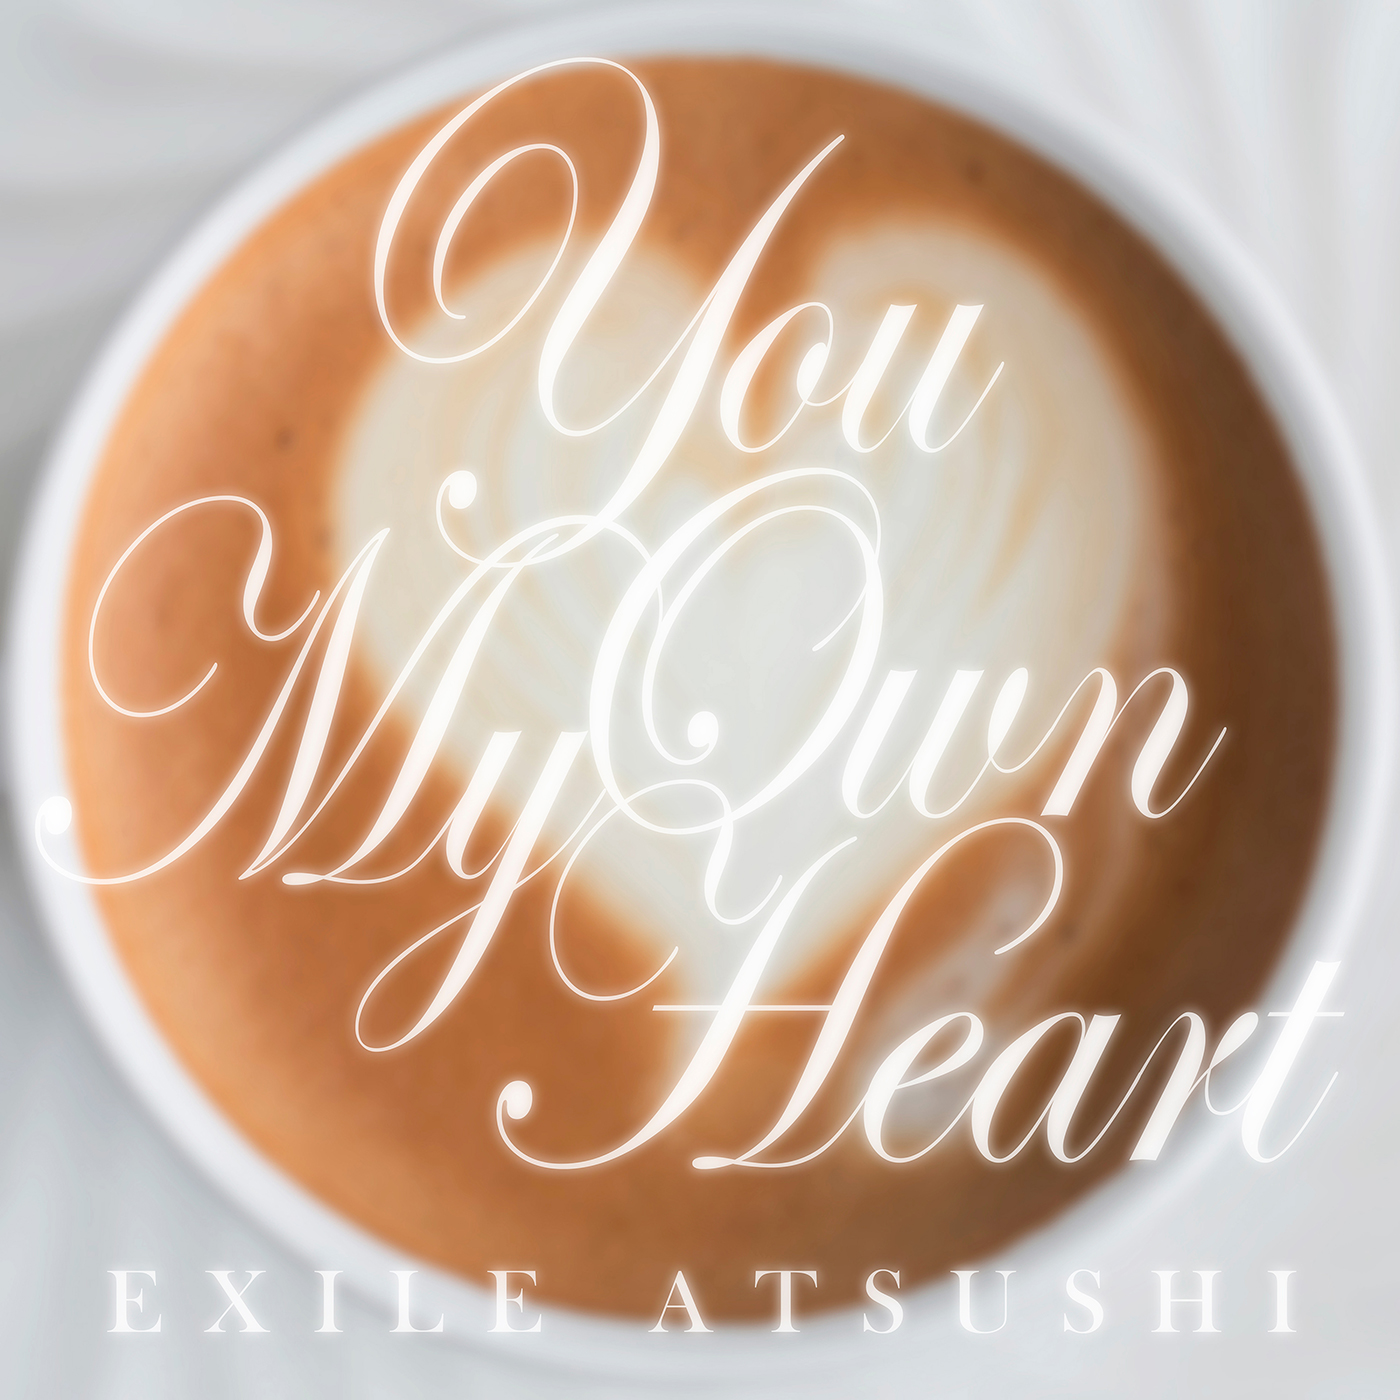 EXILE ATSUSHI、新曲「You Own My Heart」のリリースが決定！ MVには松本利夫＆EXILE USA＆EXILE MAKIDAIが参加